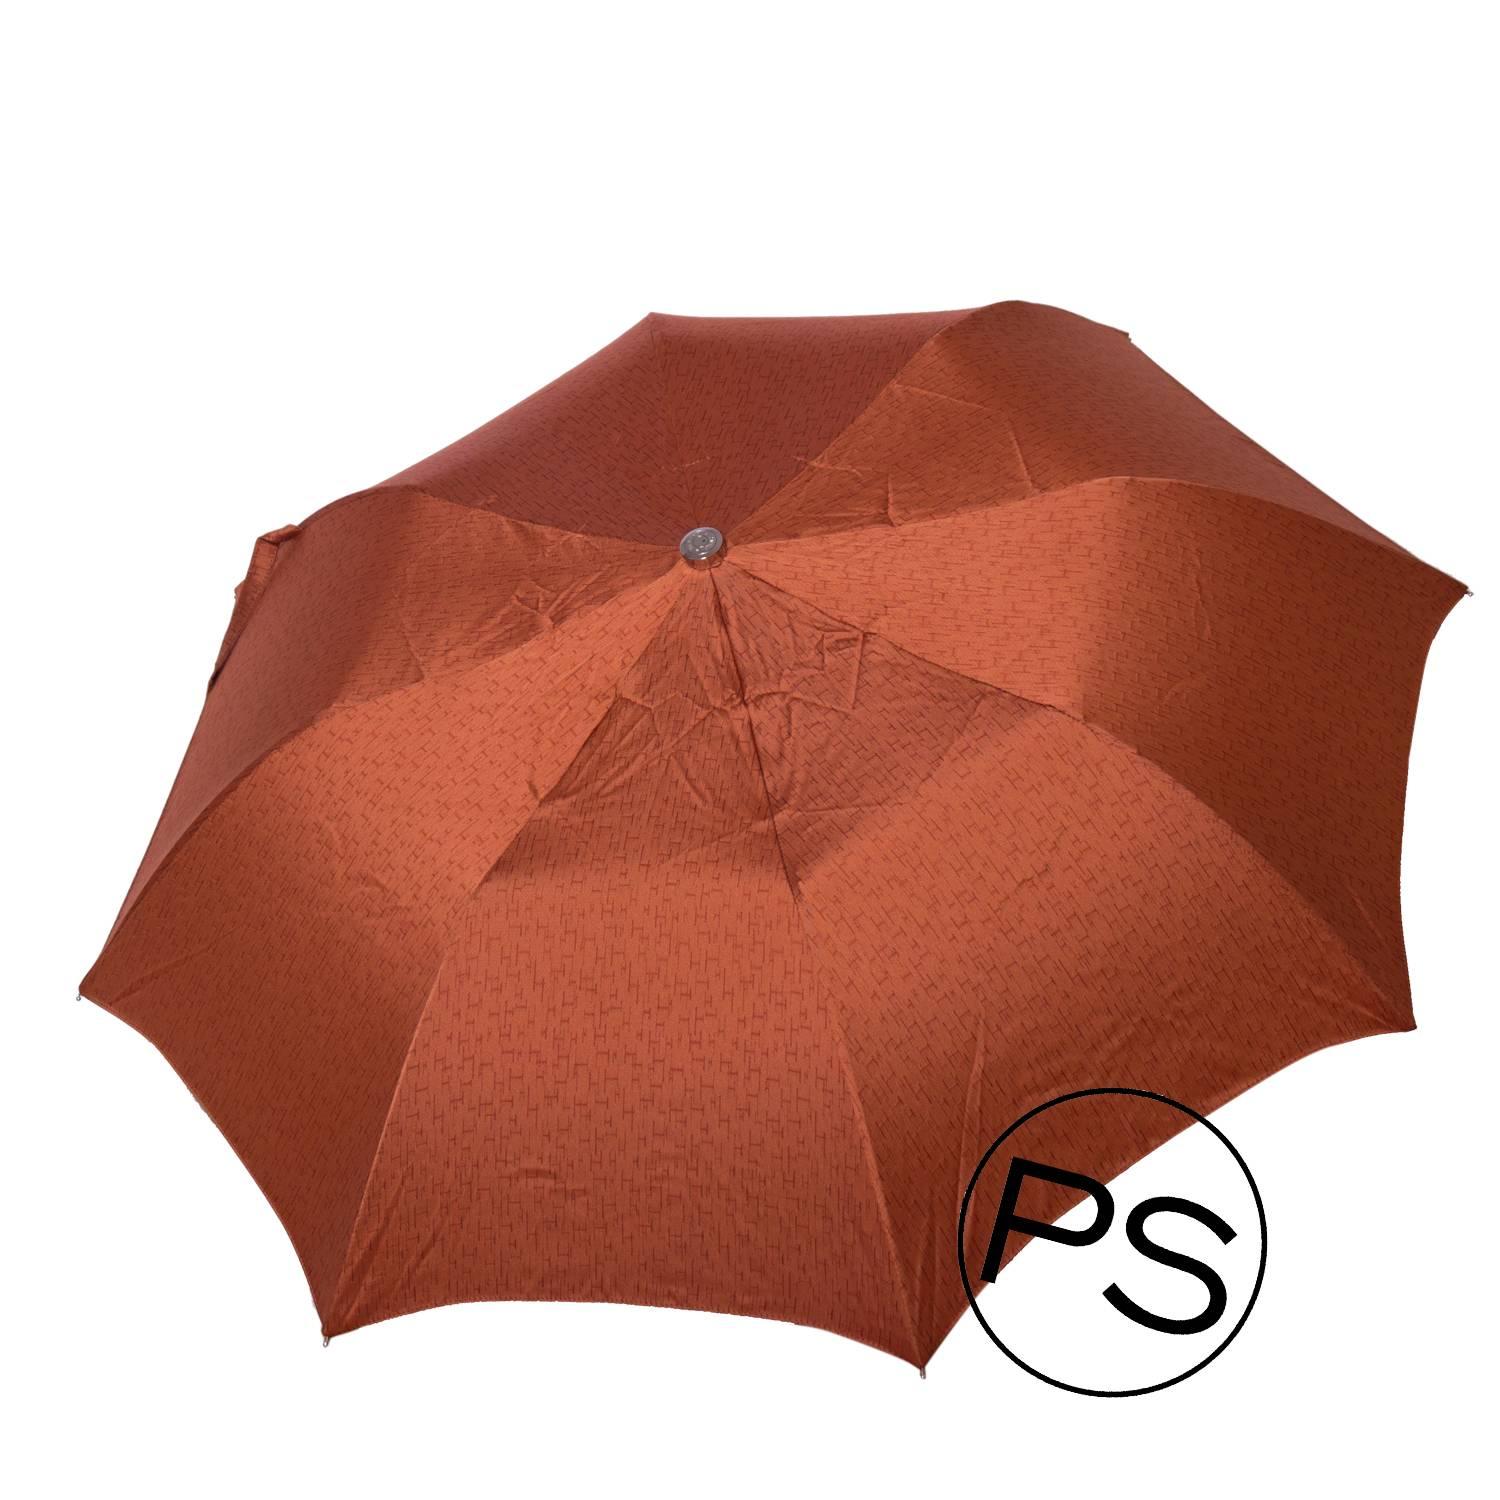 Hermes  Folding Umbrella  H ERABLE  Orange 2015.

Pre-owned and  never used.

Bought it in hermes store in 2015.

Model:H ERABLE

Composition: Polyester

Color: potiron

Details:

- Comes with Original invoice.

- Shippment and